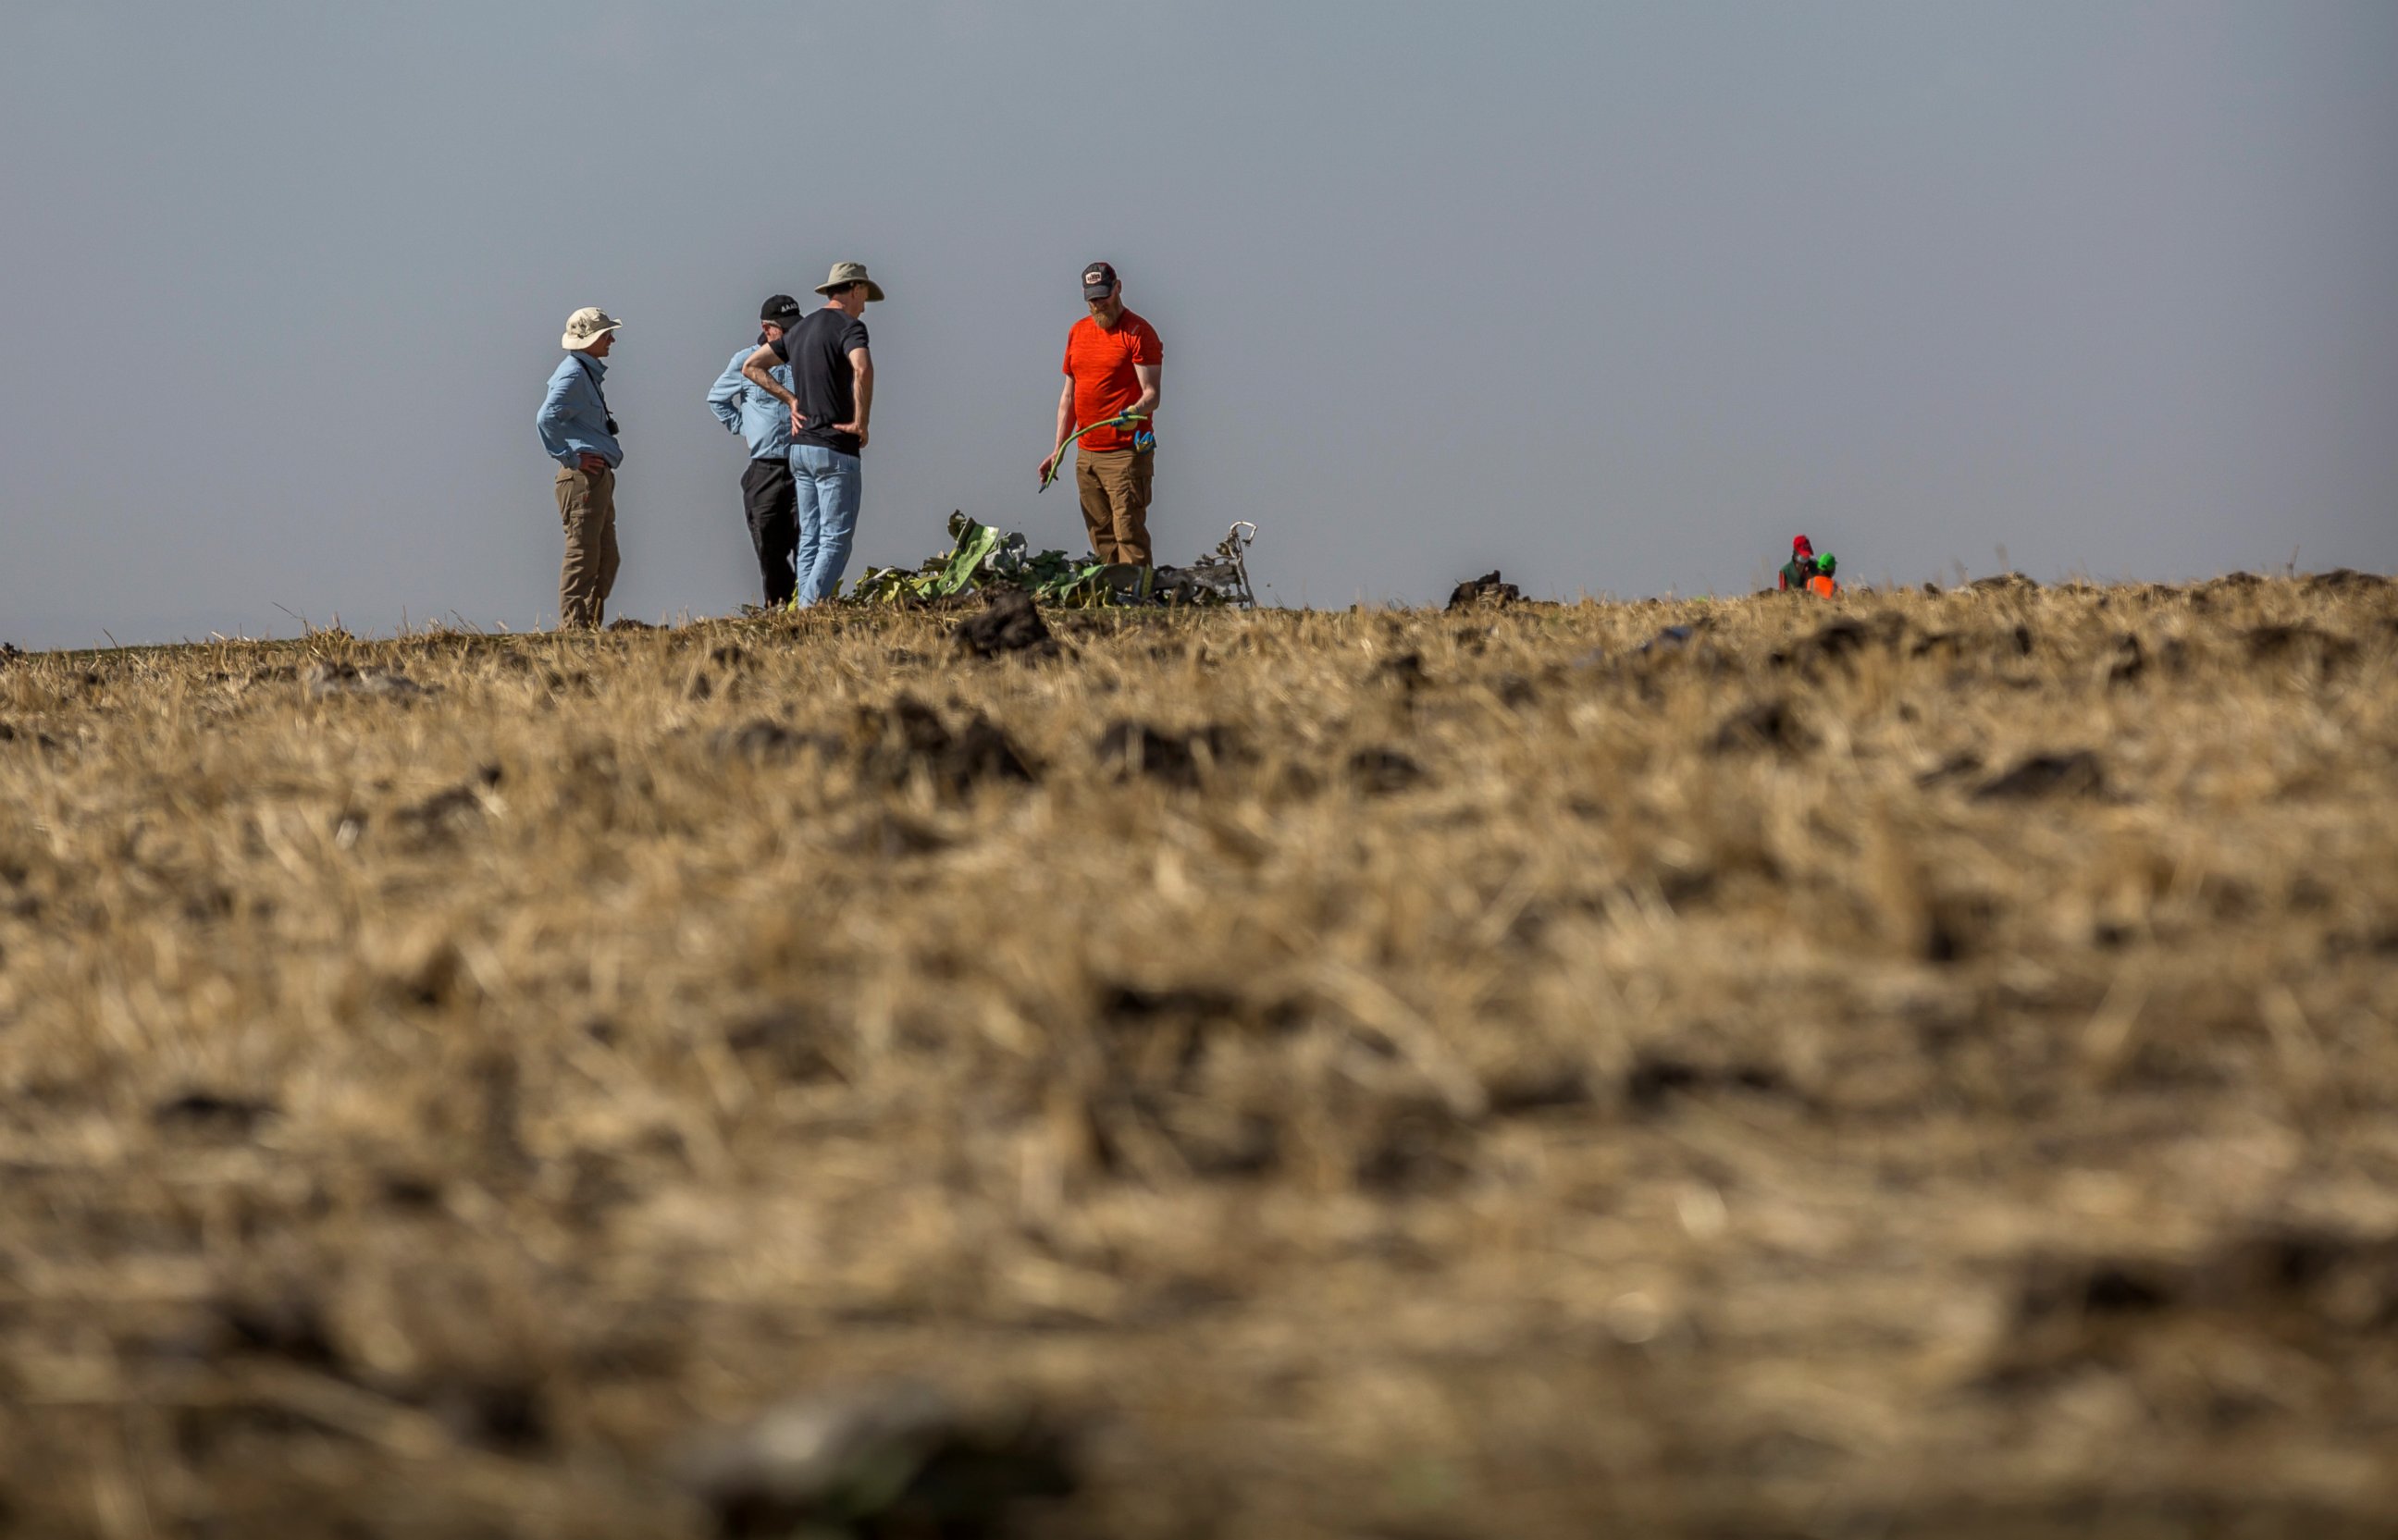 Foreign investigators examine wreckage at the scene where the Ethiopian Airlines Boeing 737 Max 8 crashed shortly after takeoff on Sunday killing all 157 on board, near Bishoftu, or Debre Zeit, south of Addis Ababa, in Ethiopia Tuesday, March 12, 201